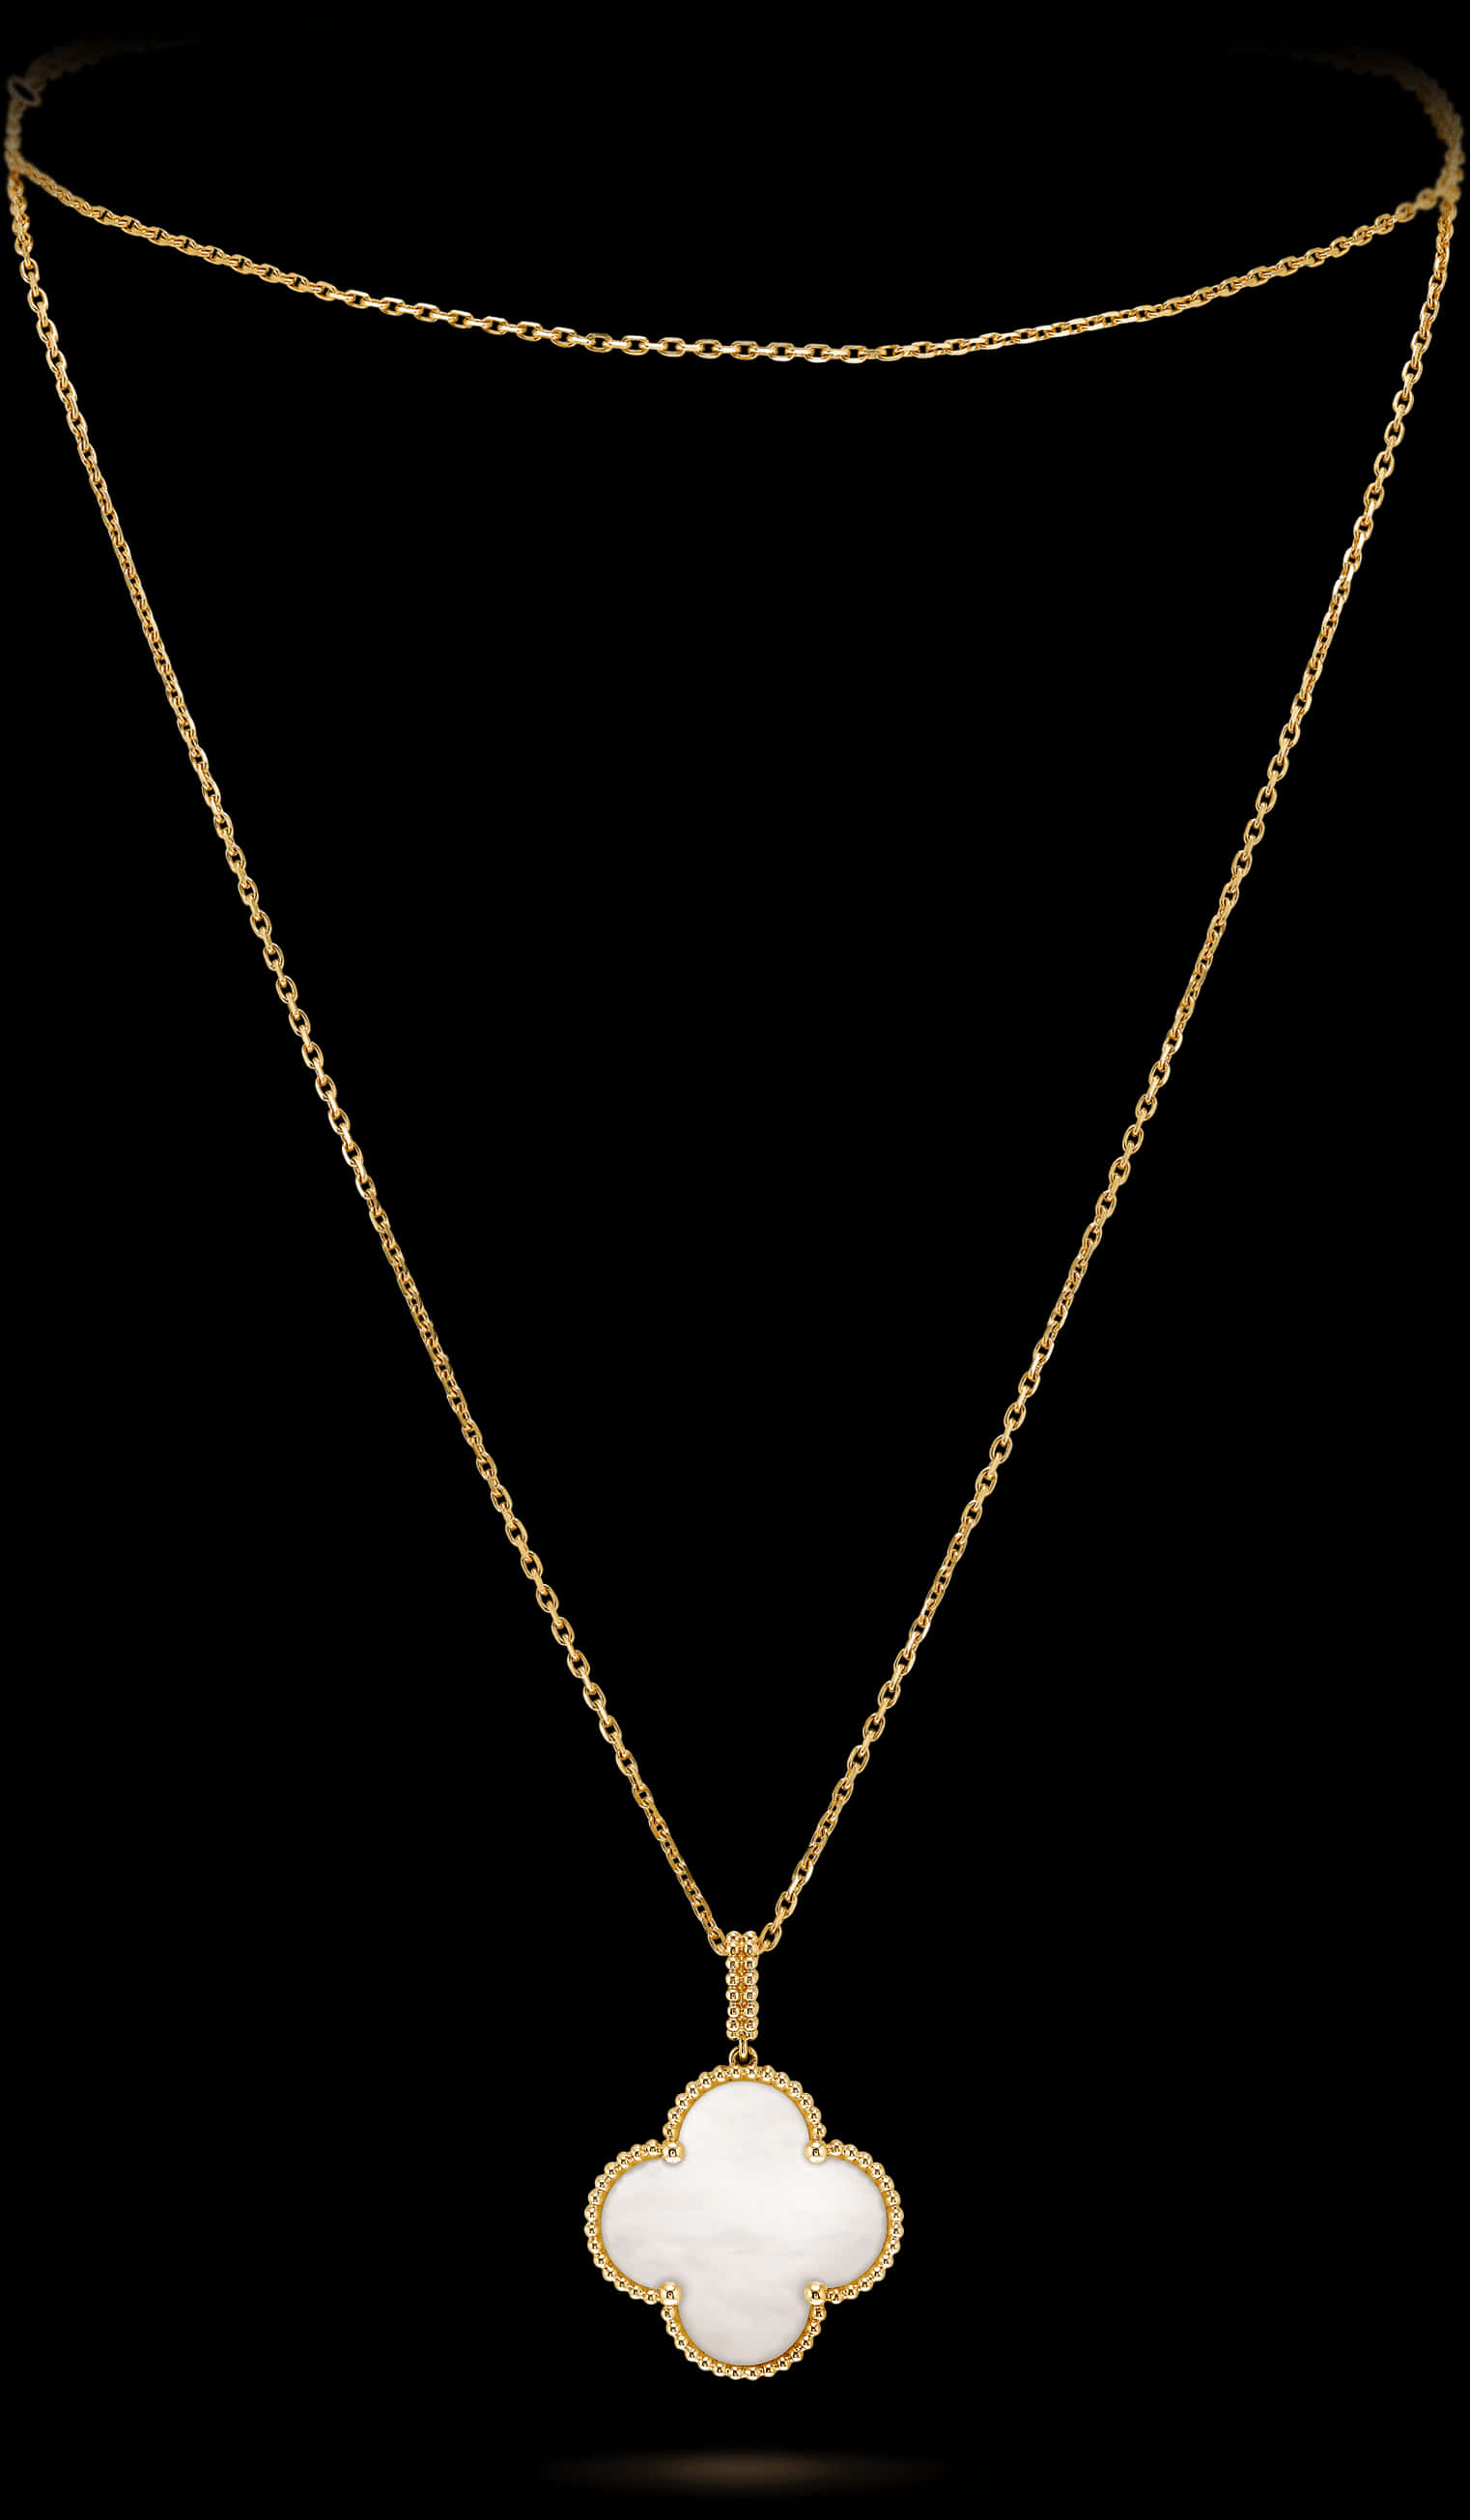 Elegant Gold Chainwith White Pendant PNG